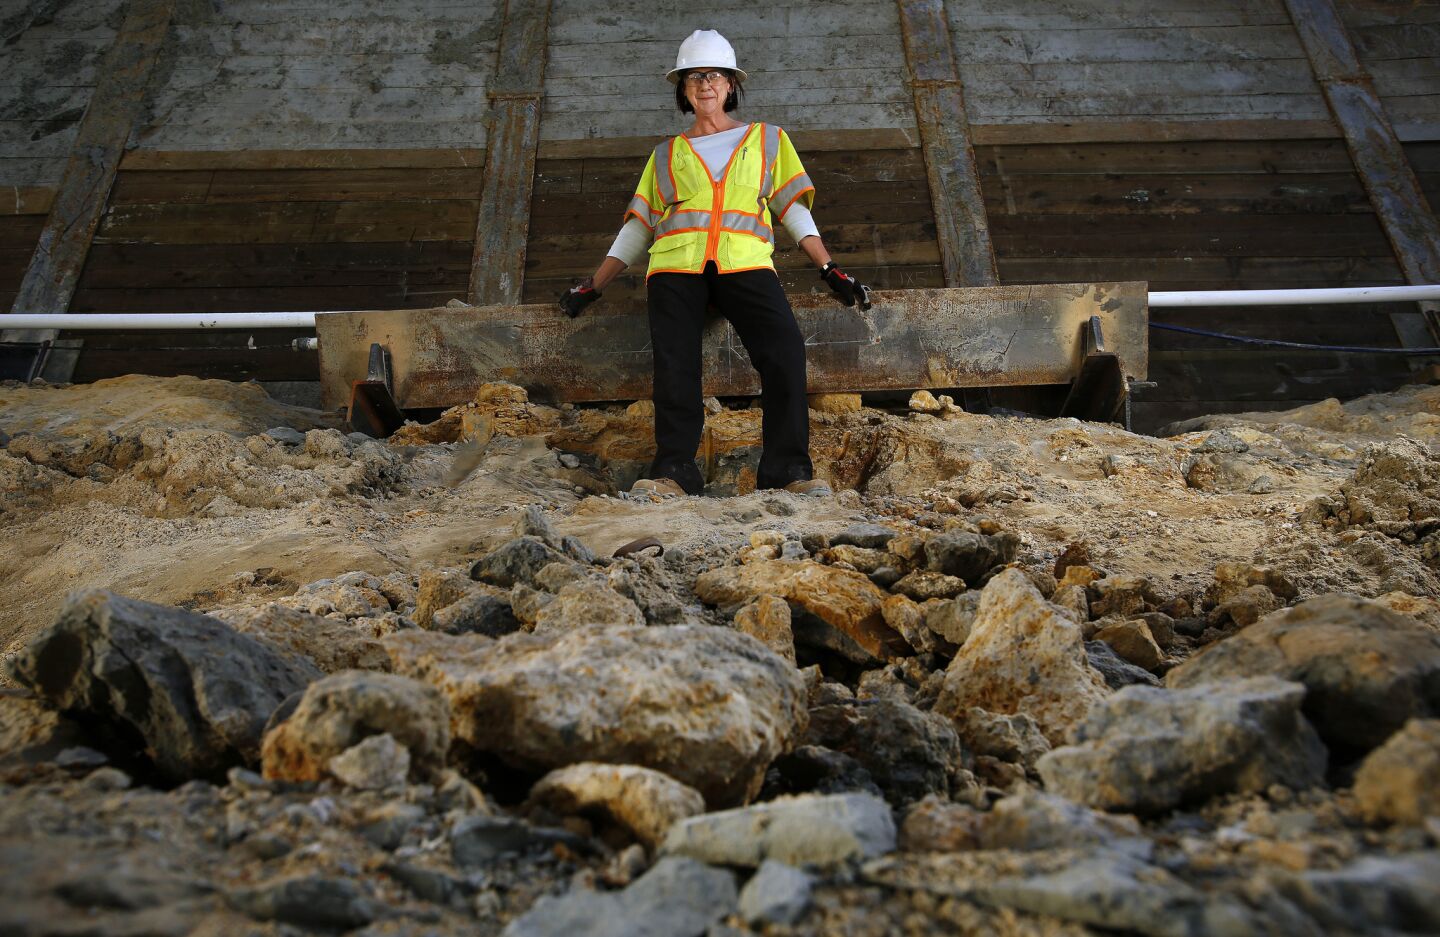 Geologist Rosalind Munro of AMEC, a geotechnical consulting firm, at the Wilshire Grand tower construction site in downtown L.A. Before construction started, Munro went down a borehole eight stories deep to verify the stability of the building site.